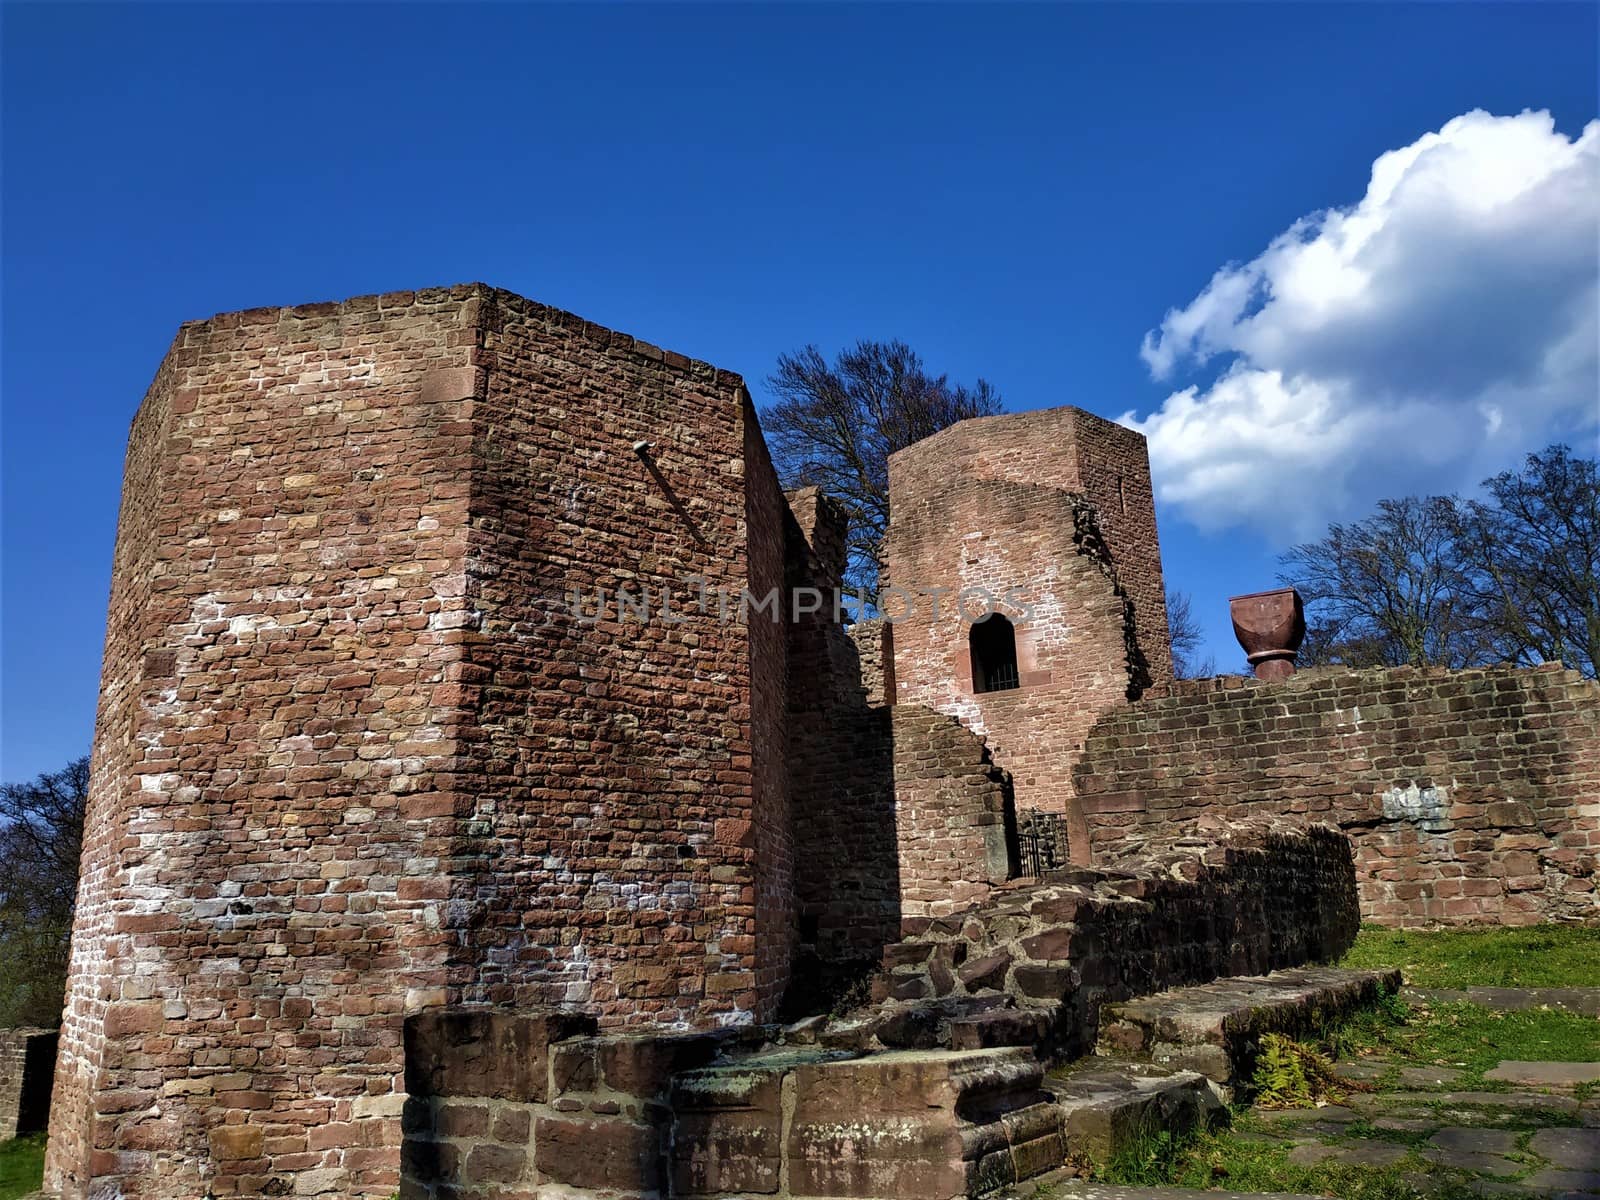 Part of the abandonned Saint Michael's monastery in Heidelberg by pisces2386